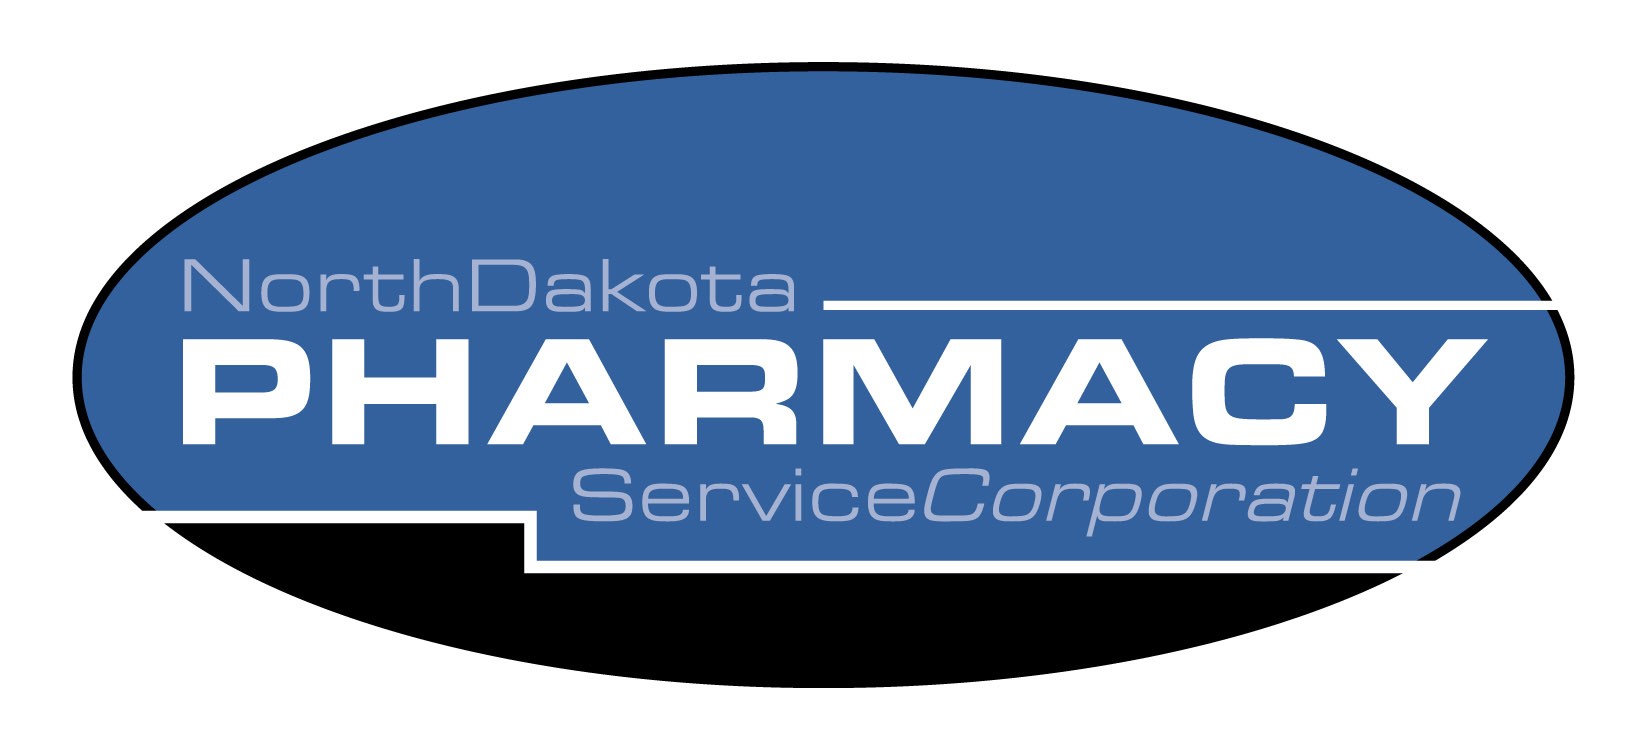 This is the ND Pharrmacy LOGO  